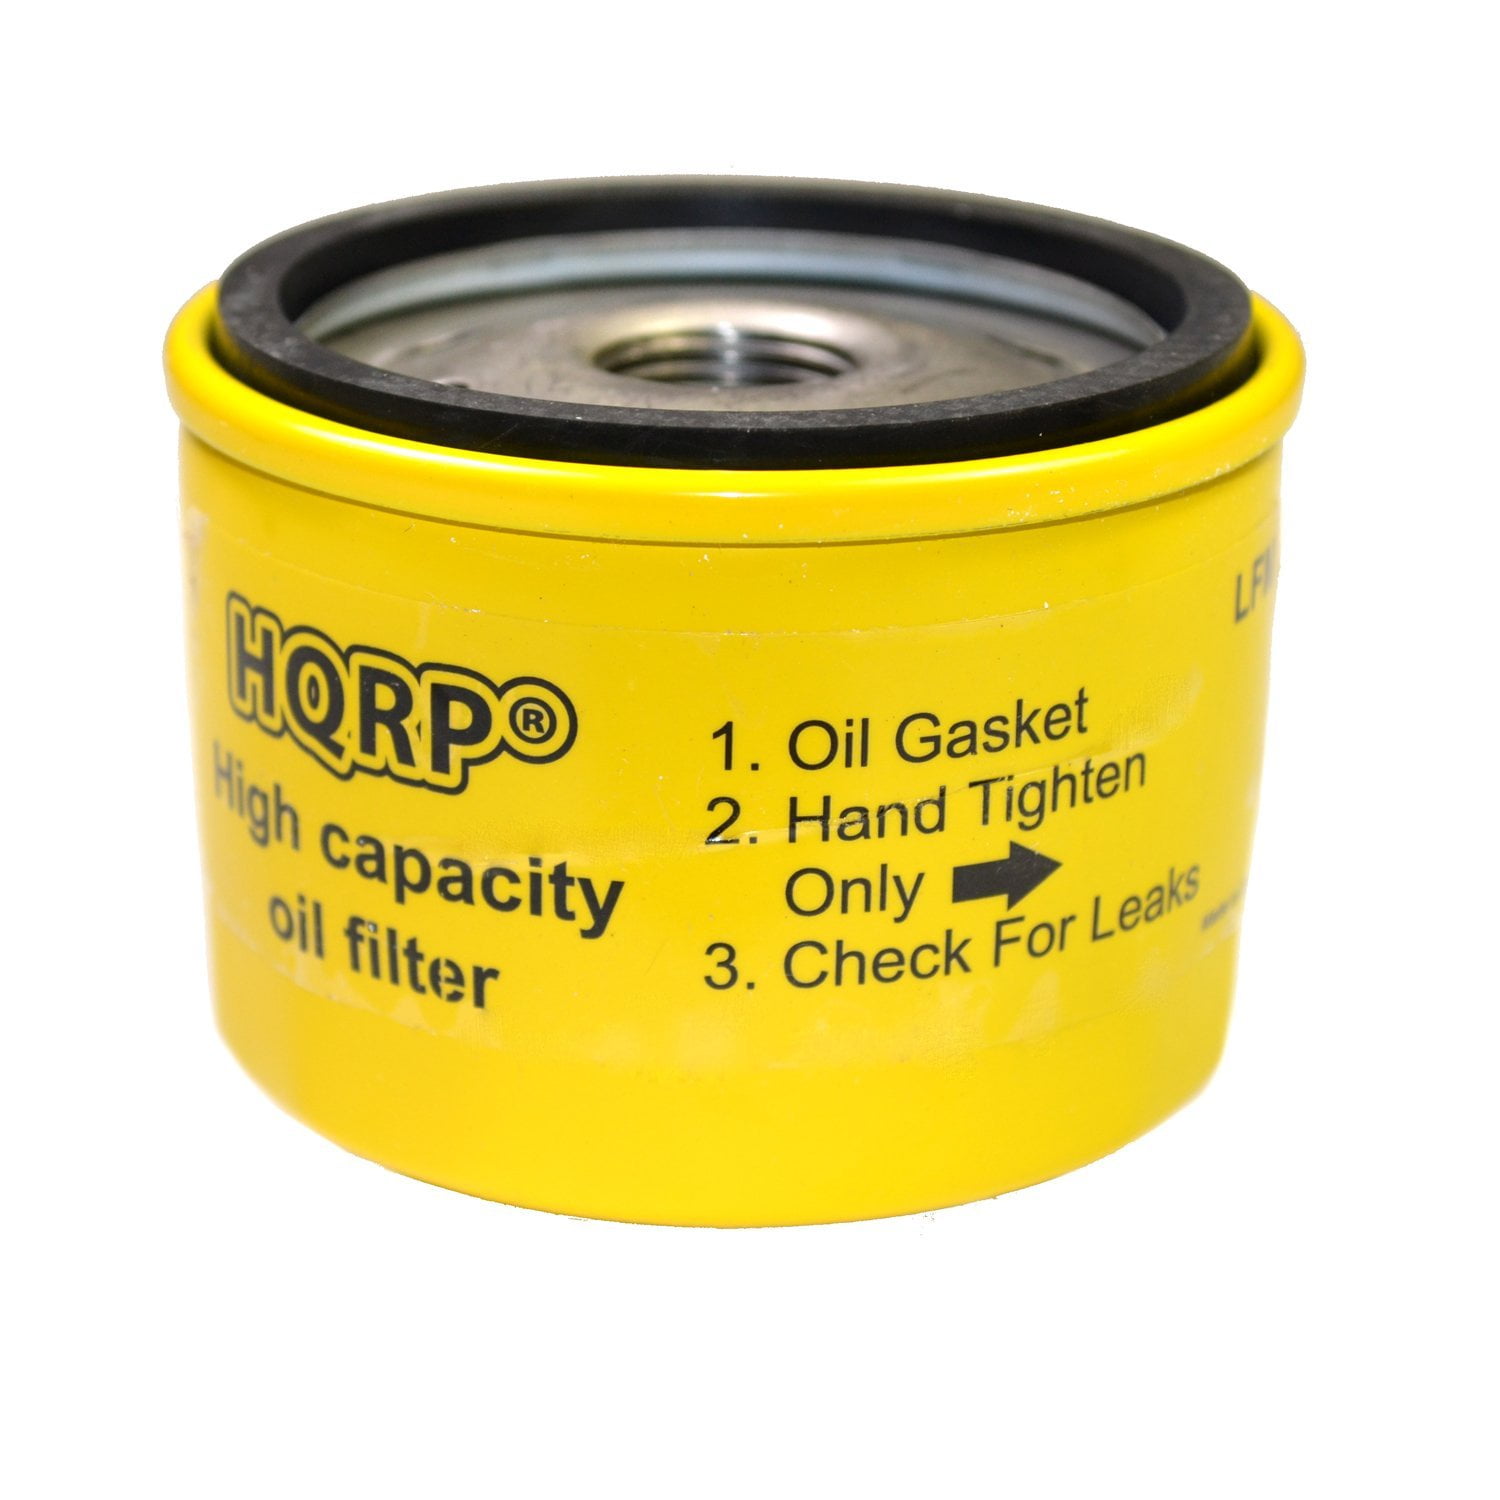 HQRP Oil Filter for Briggs & Stratton Engines 92134 695396 696854 795890 492932S 